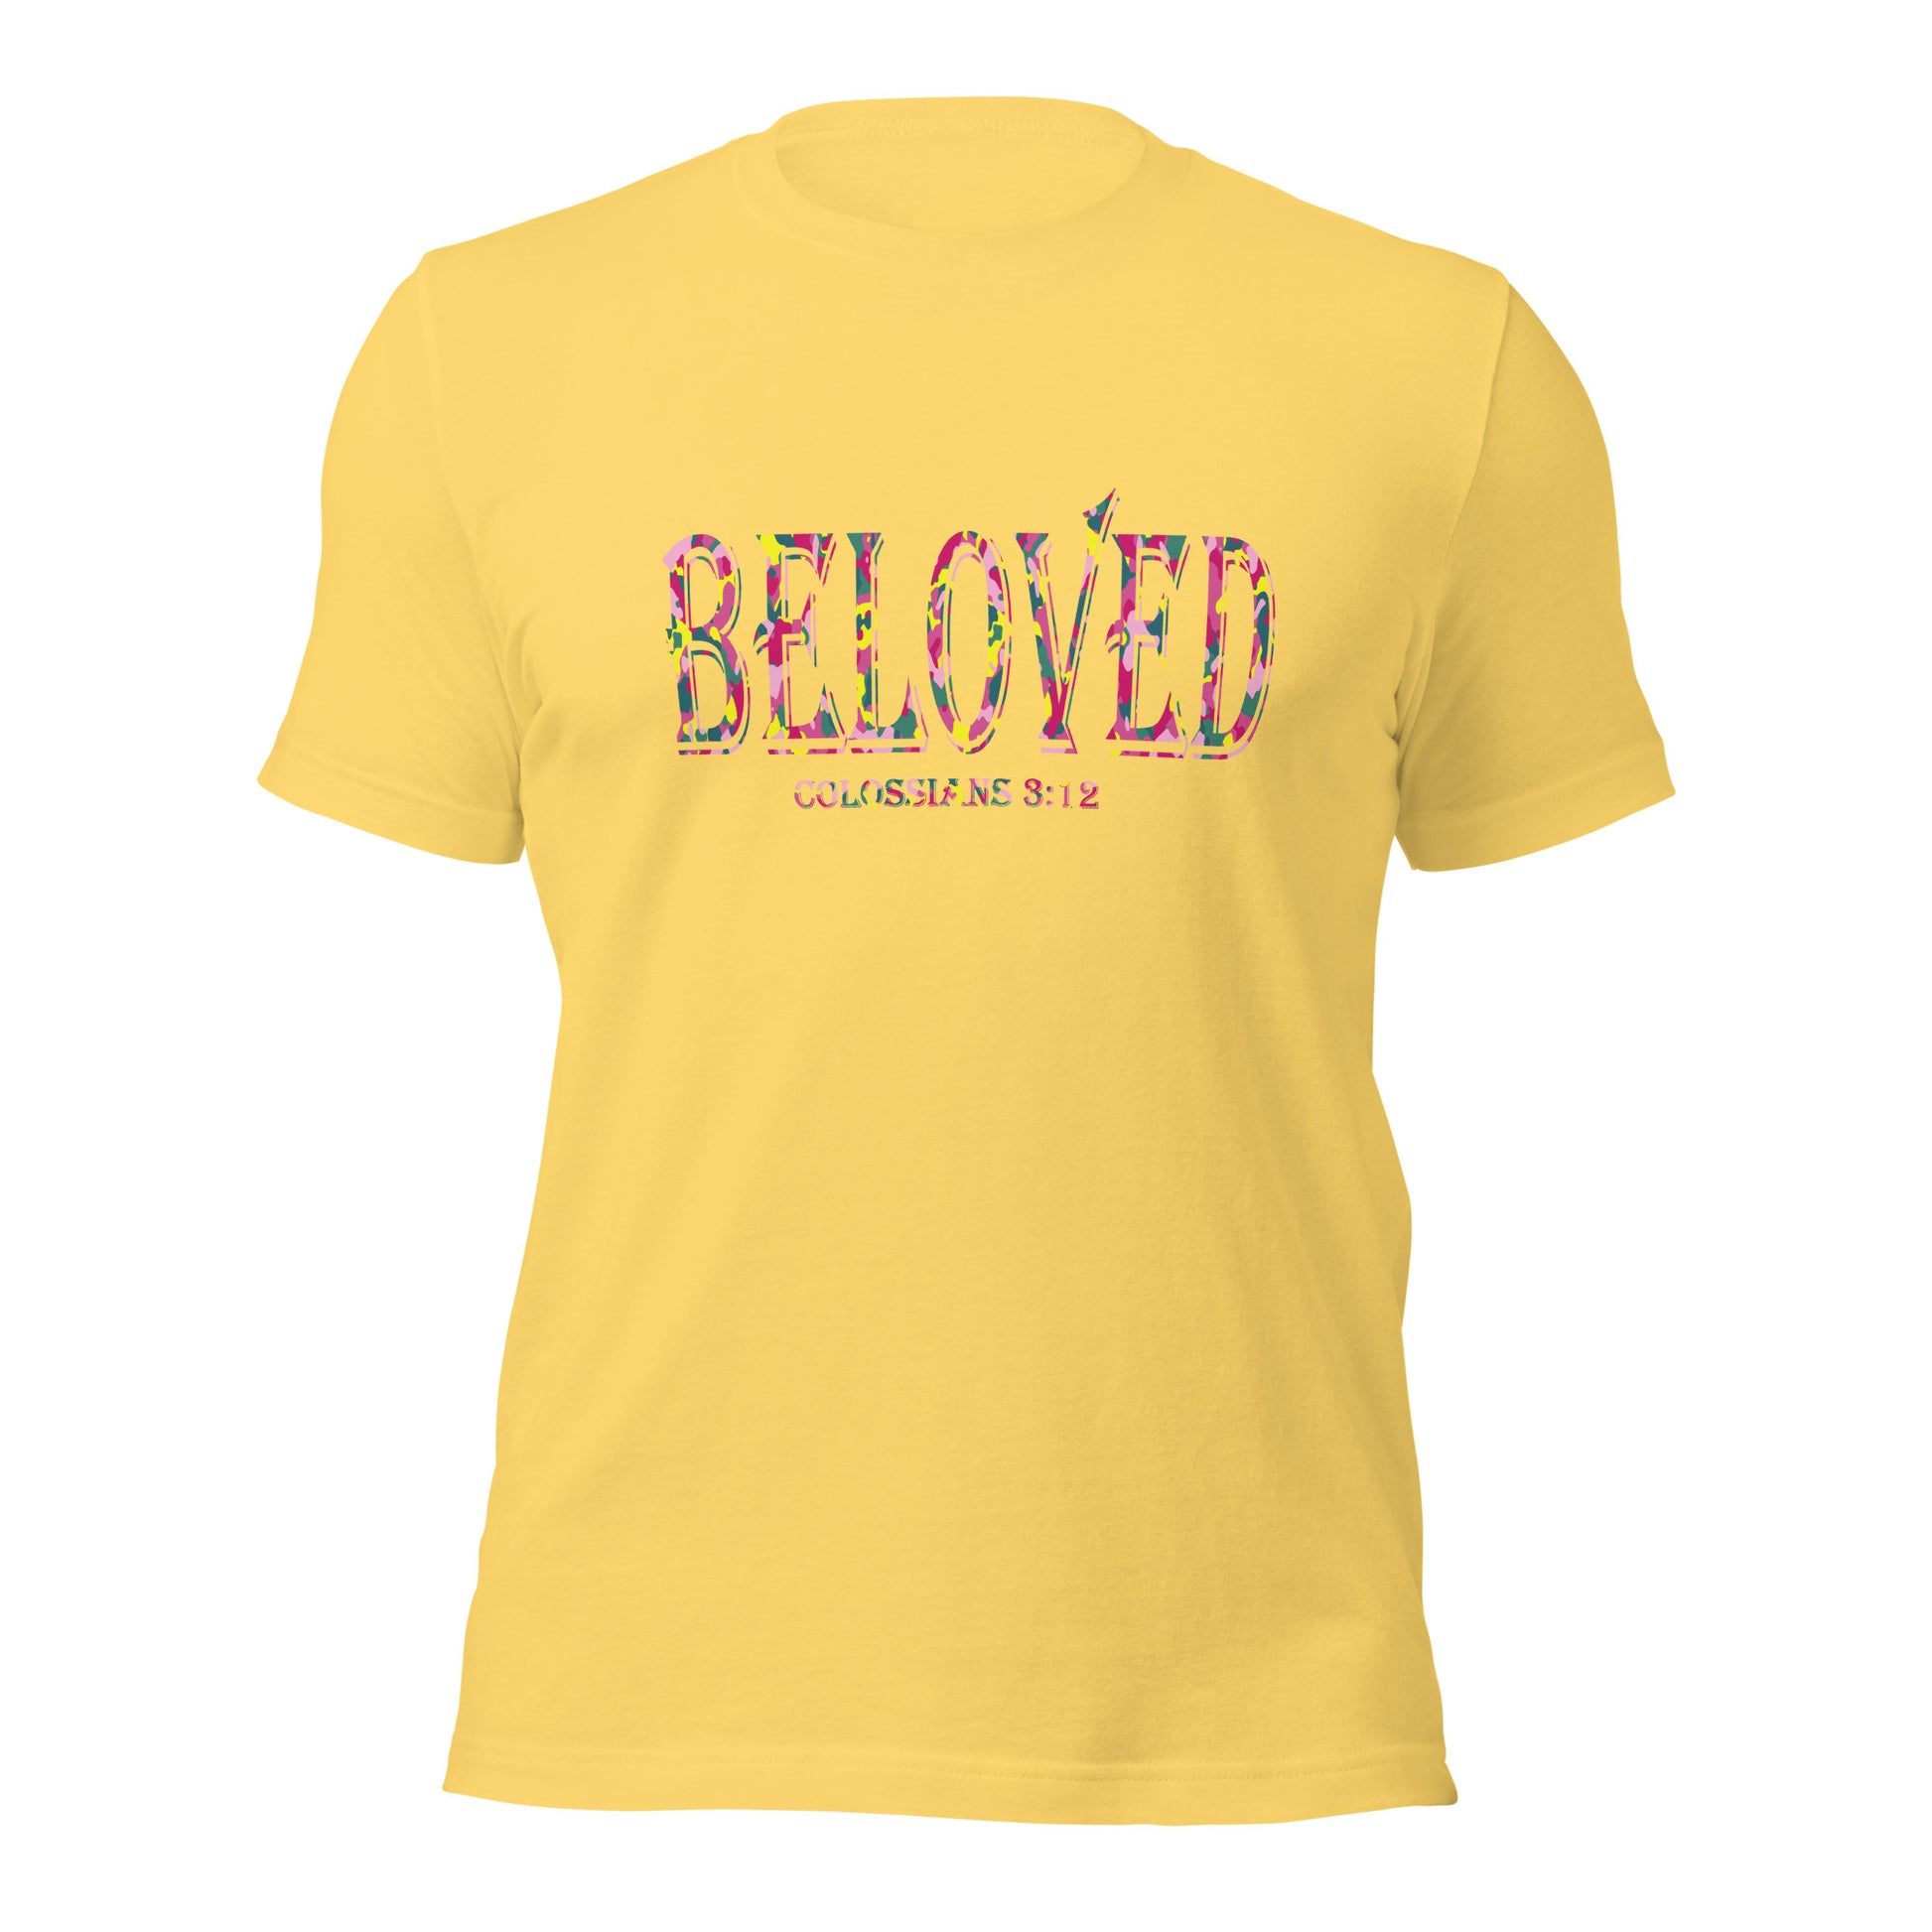 Colossians 3:12 Beloved T-shirt yellow